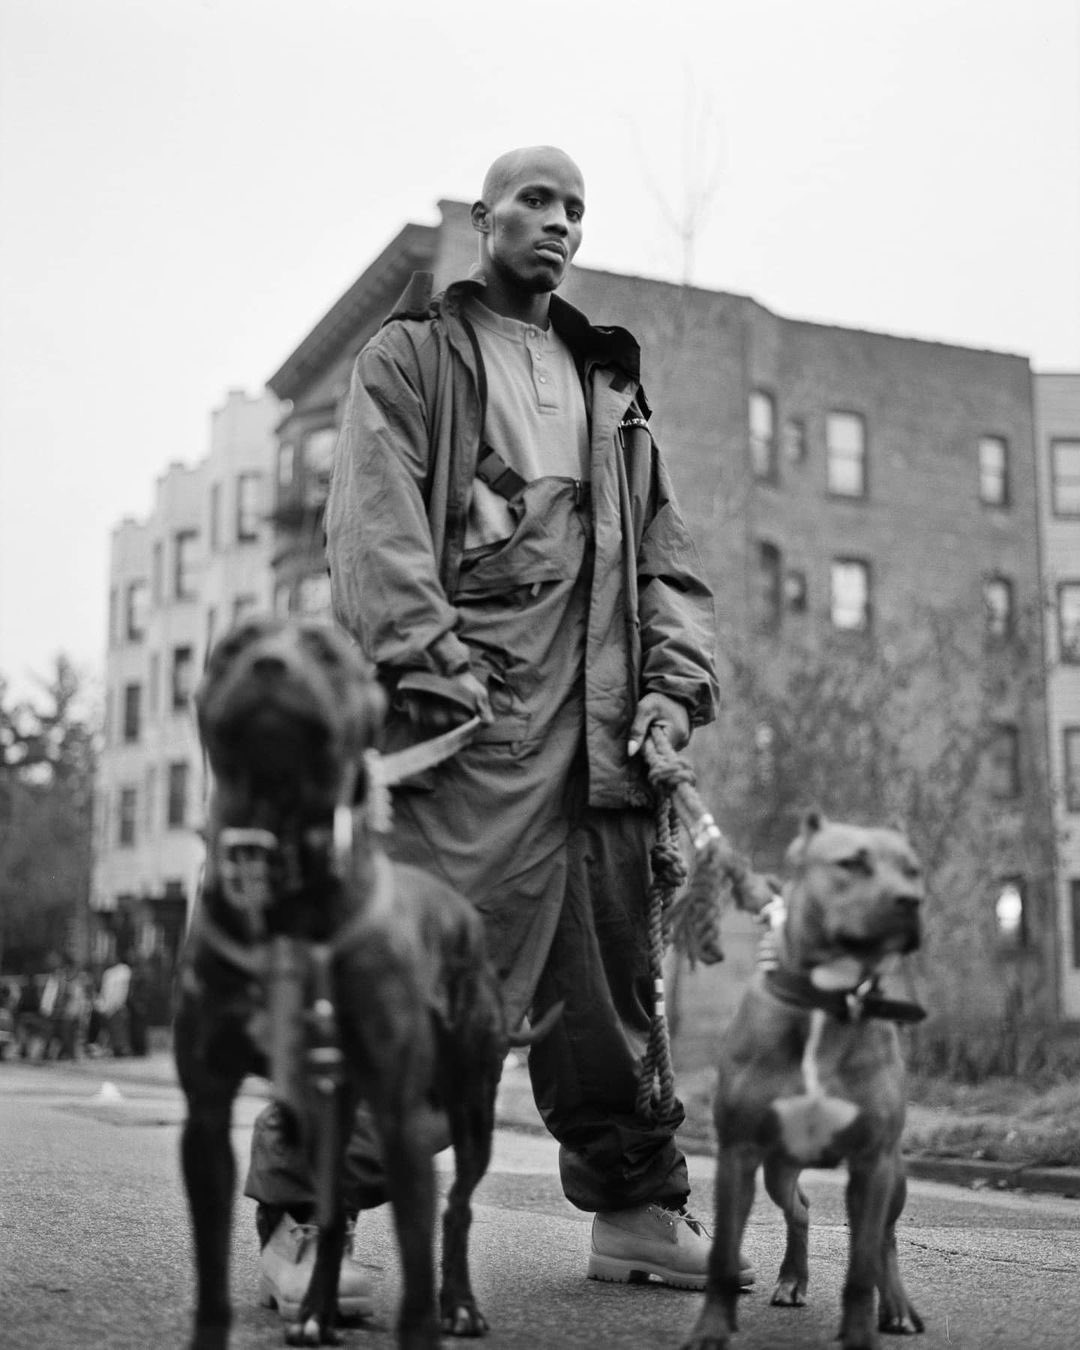 Happy 50th Birthday to  What are your top 3  favorite DMX songs/collabs or albums? : 